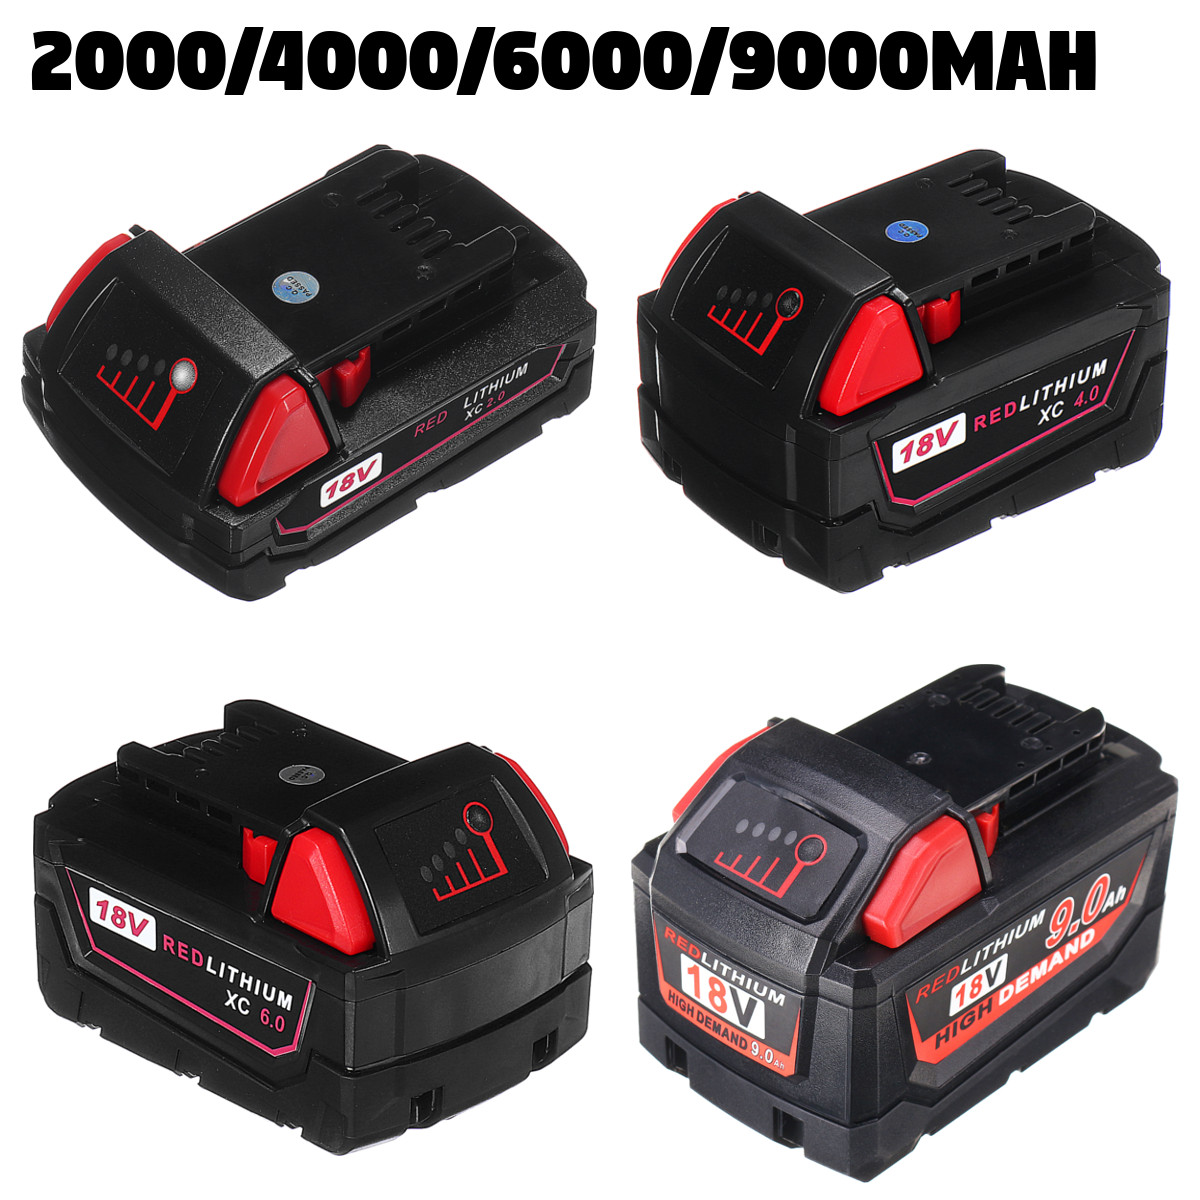 

18V 2.0-9.0Ah Li-Ion Battery For Milwaukee M18 48-11-1852 Extended Capacty Electric Power Tool Li-ion Battery